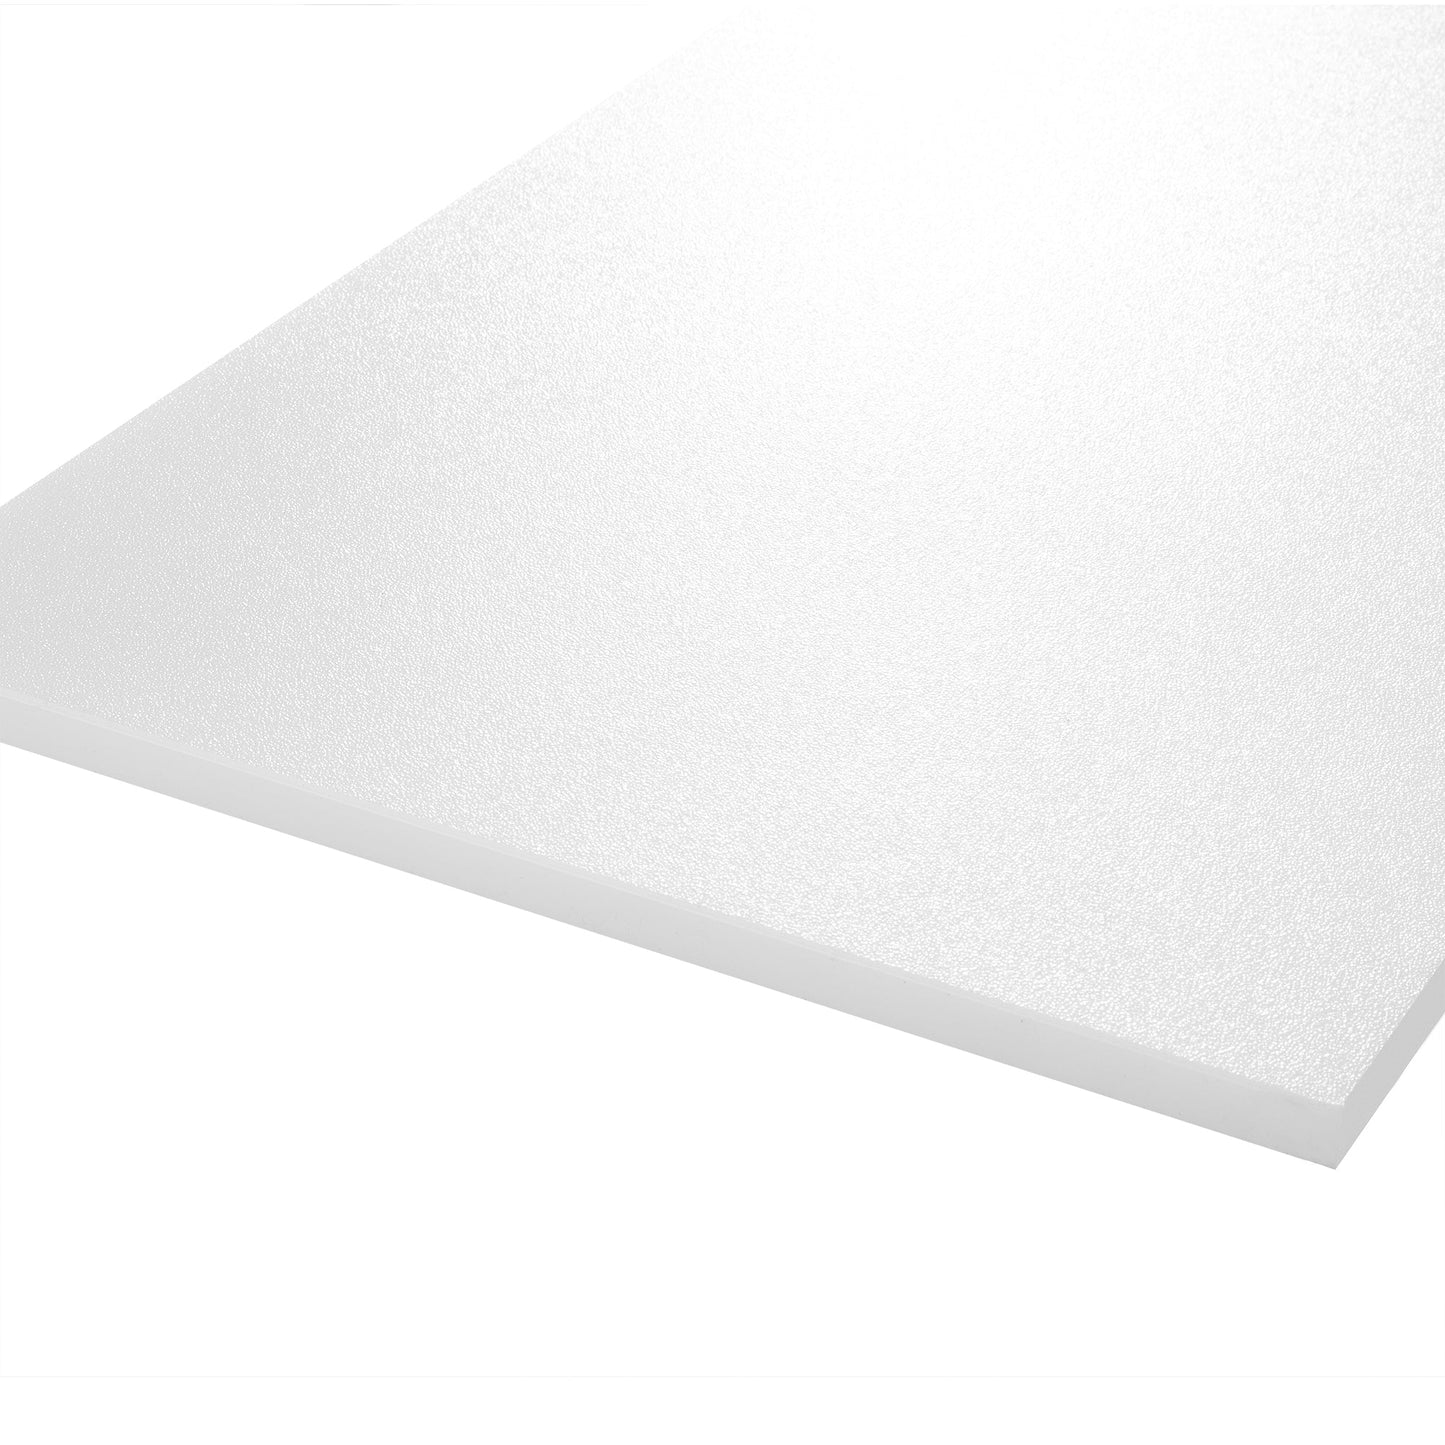 CUTTING BOARD, 8"D X 1/2" THICK, WHITE (NOT PRE DRILLED)(SKU - 967978)